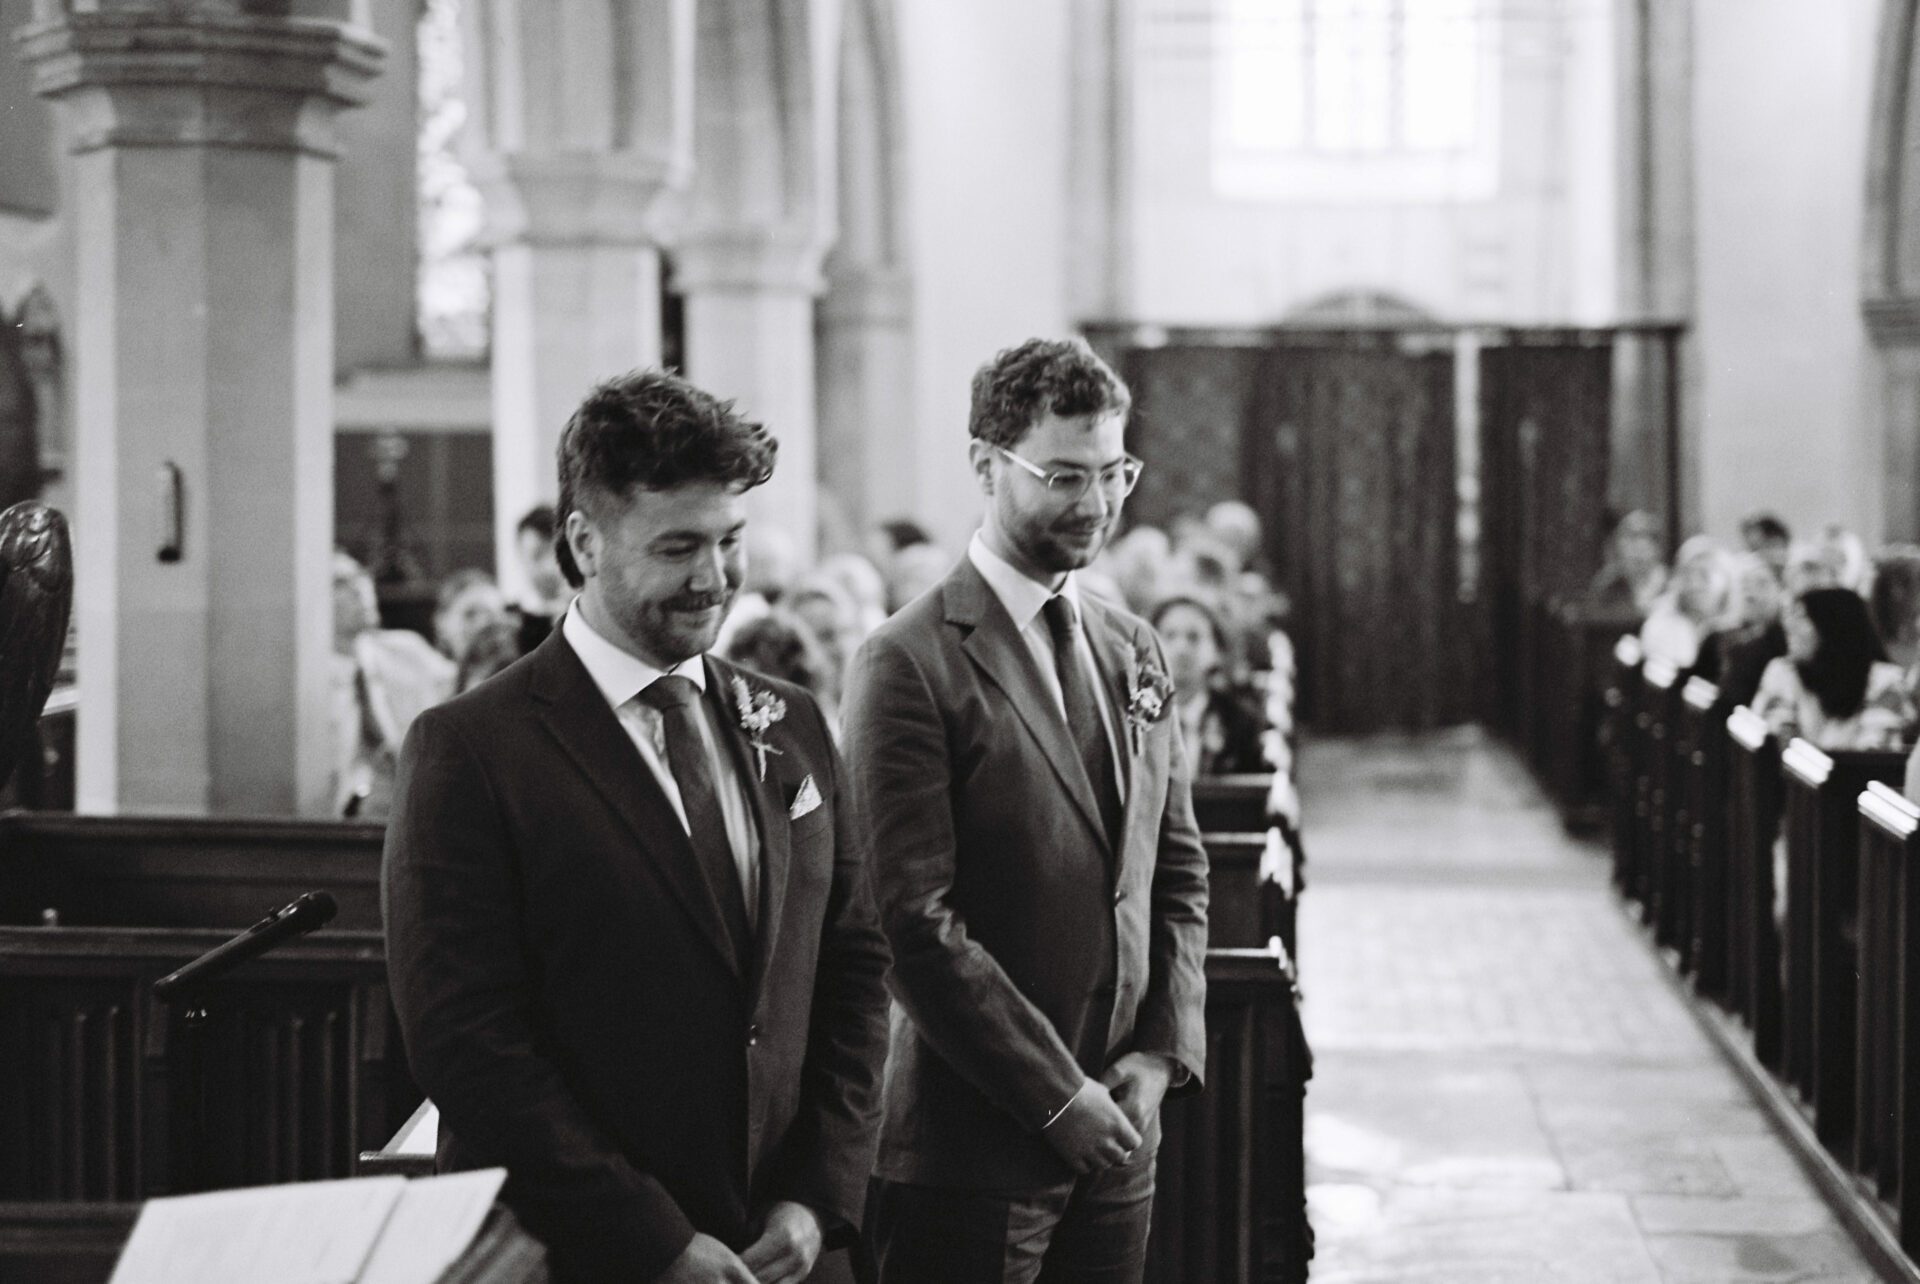 The groom awaits the arrival of the bride at his Gloucestershire church wedding, captured on 35mm film